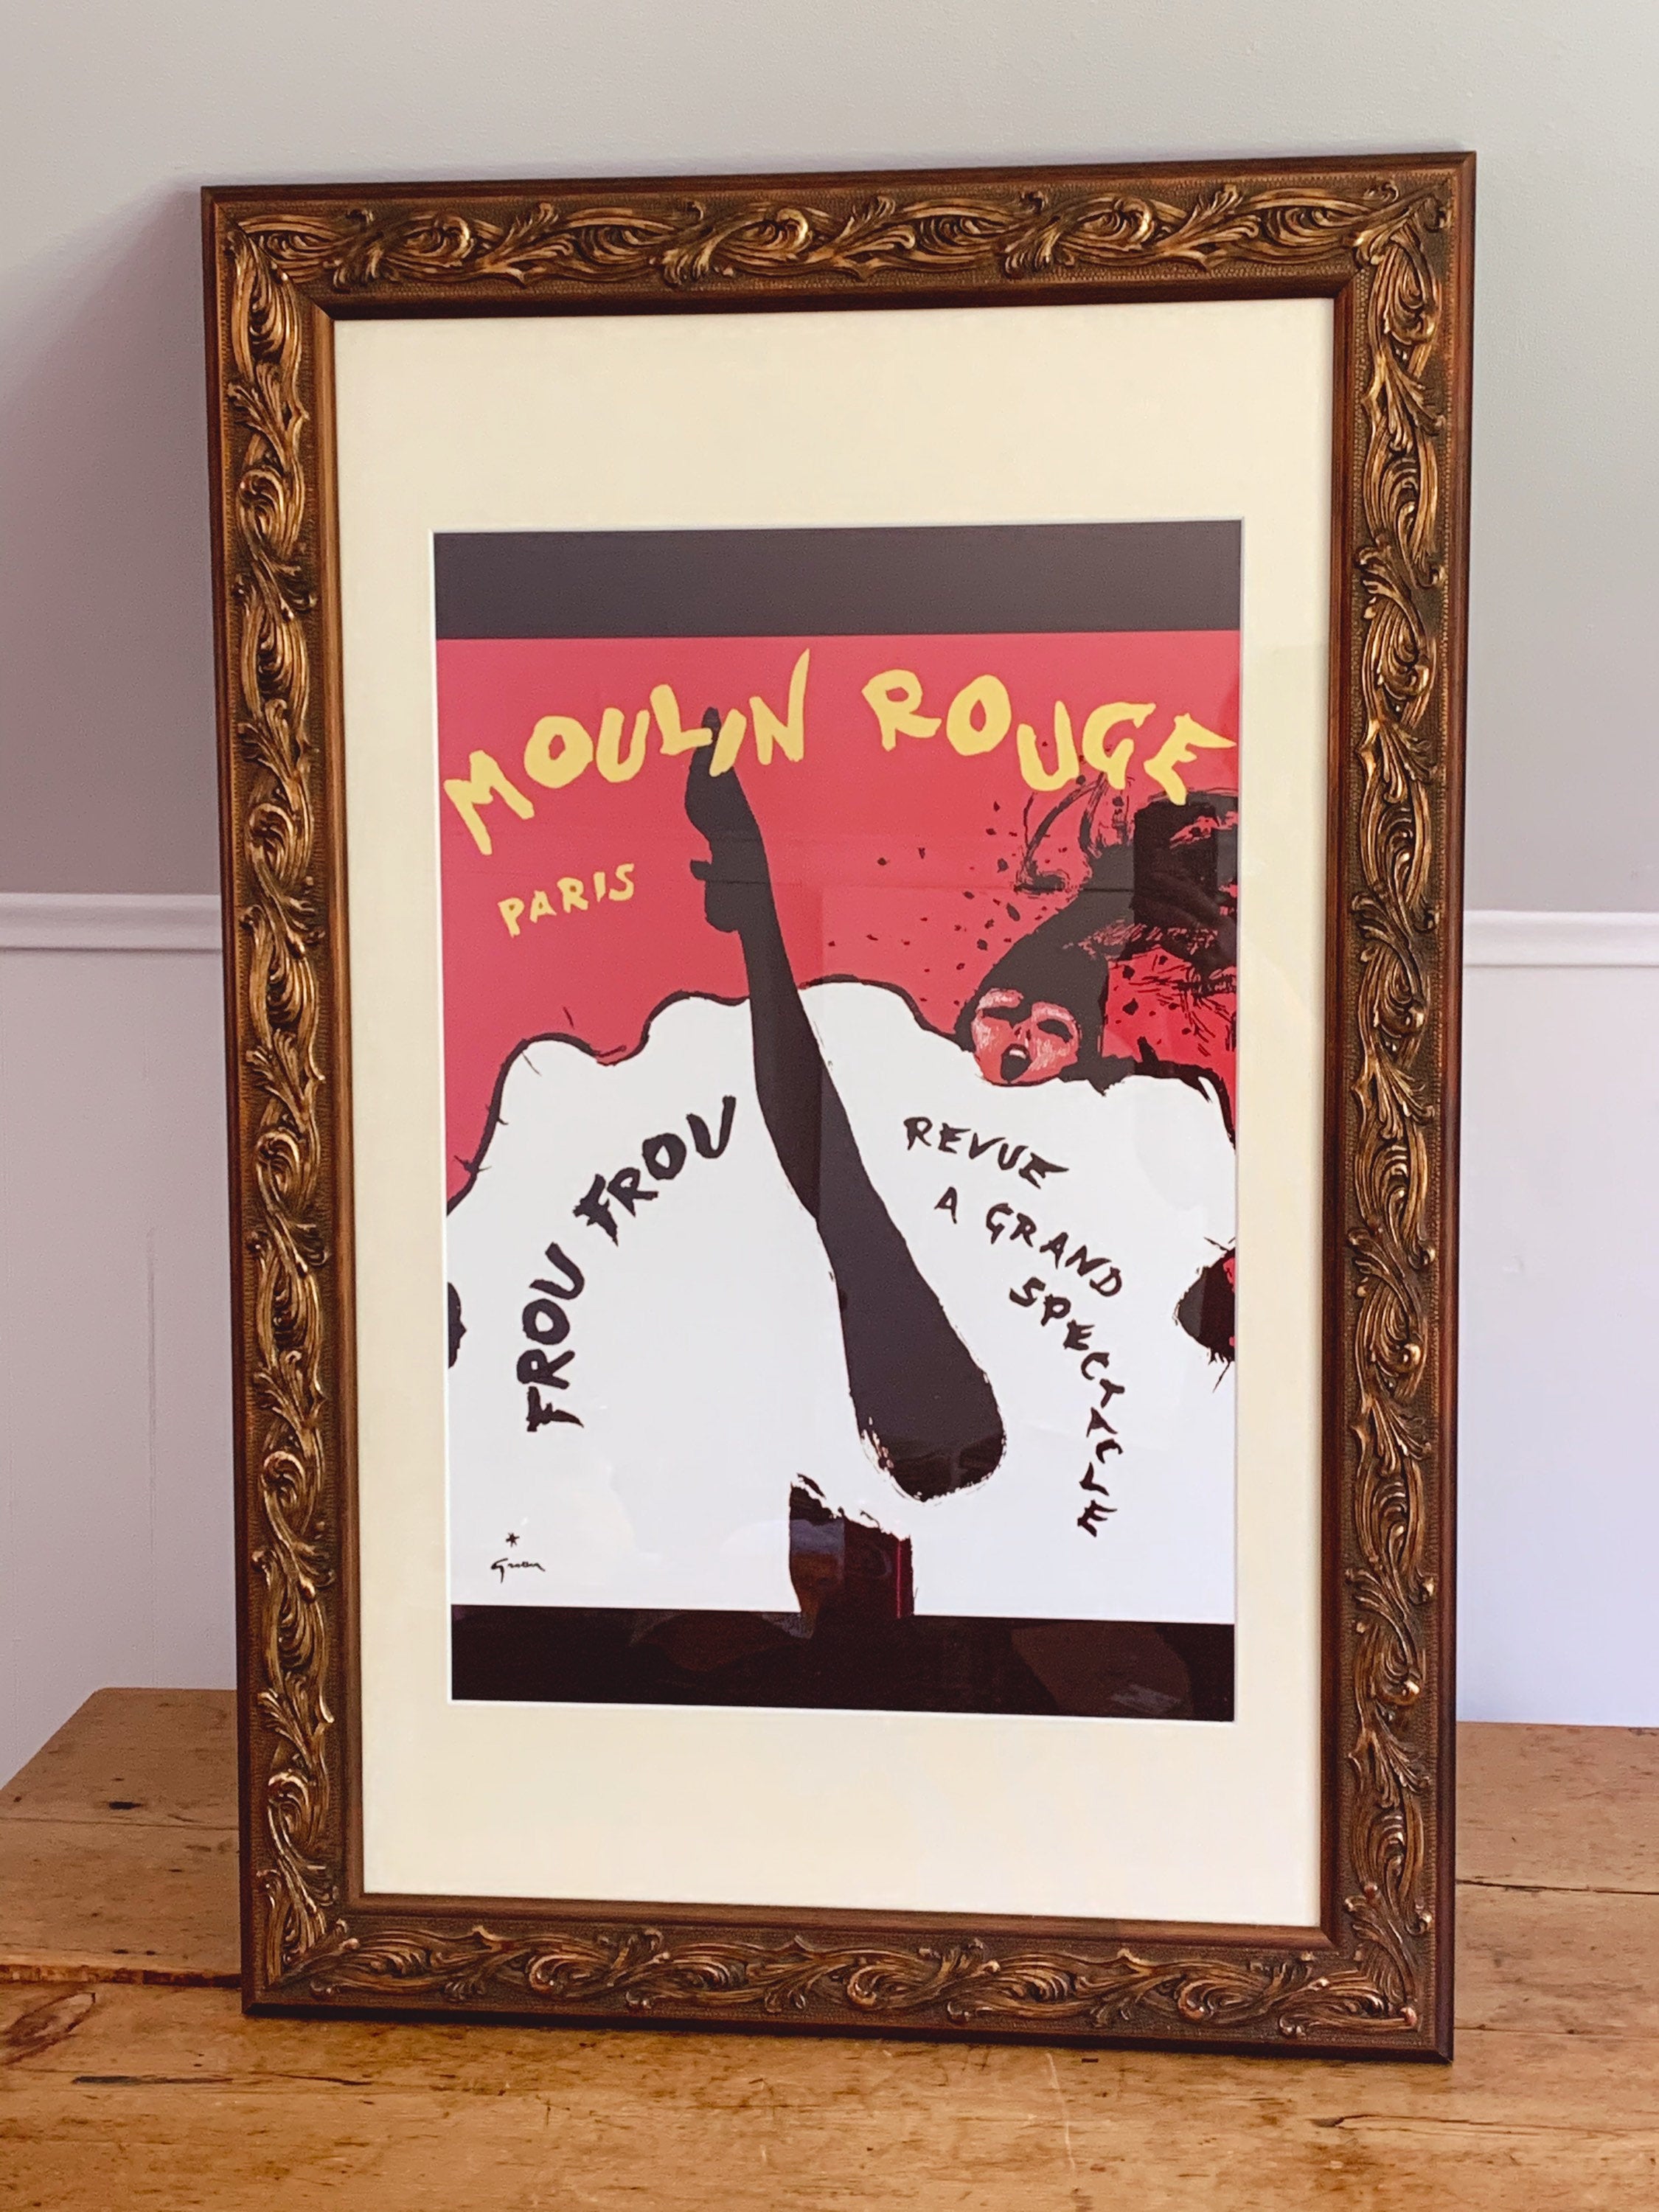 Bal Du Moulin Rouge, Paris (Frou Frou) Lithograph Poster by Rene Gruau on Linen Later Printing in Professional Frame